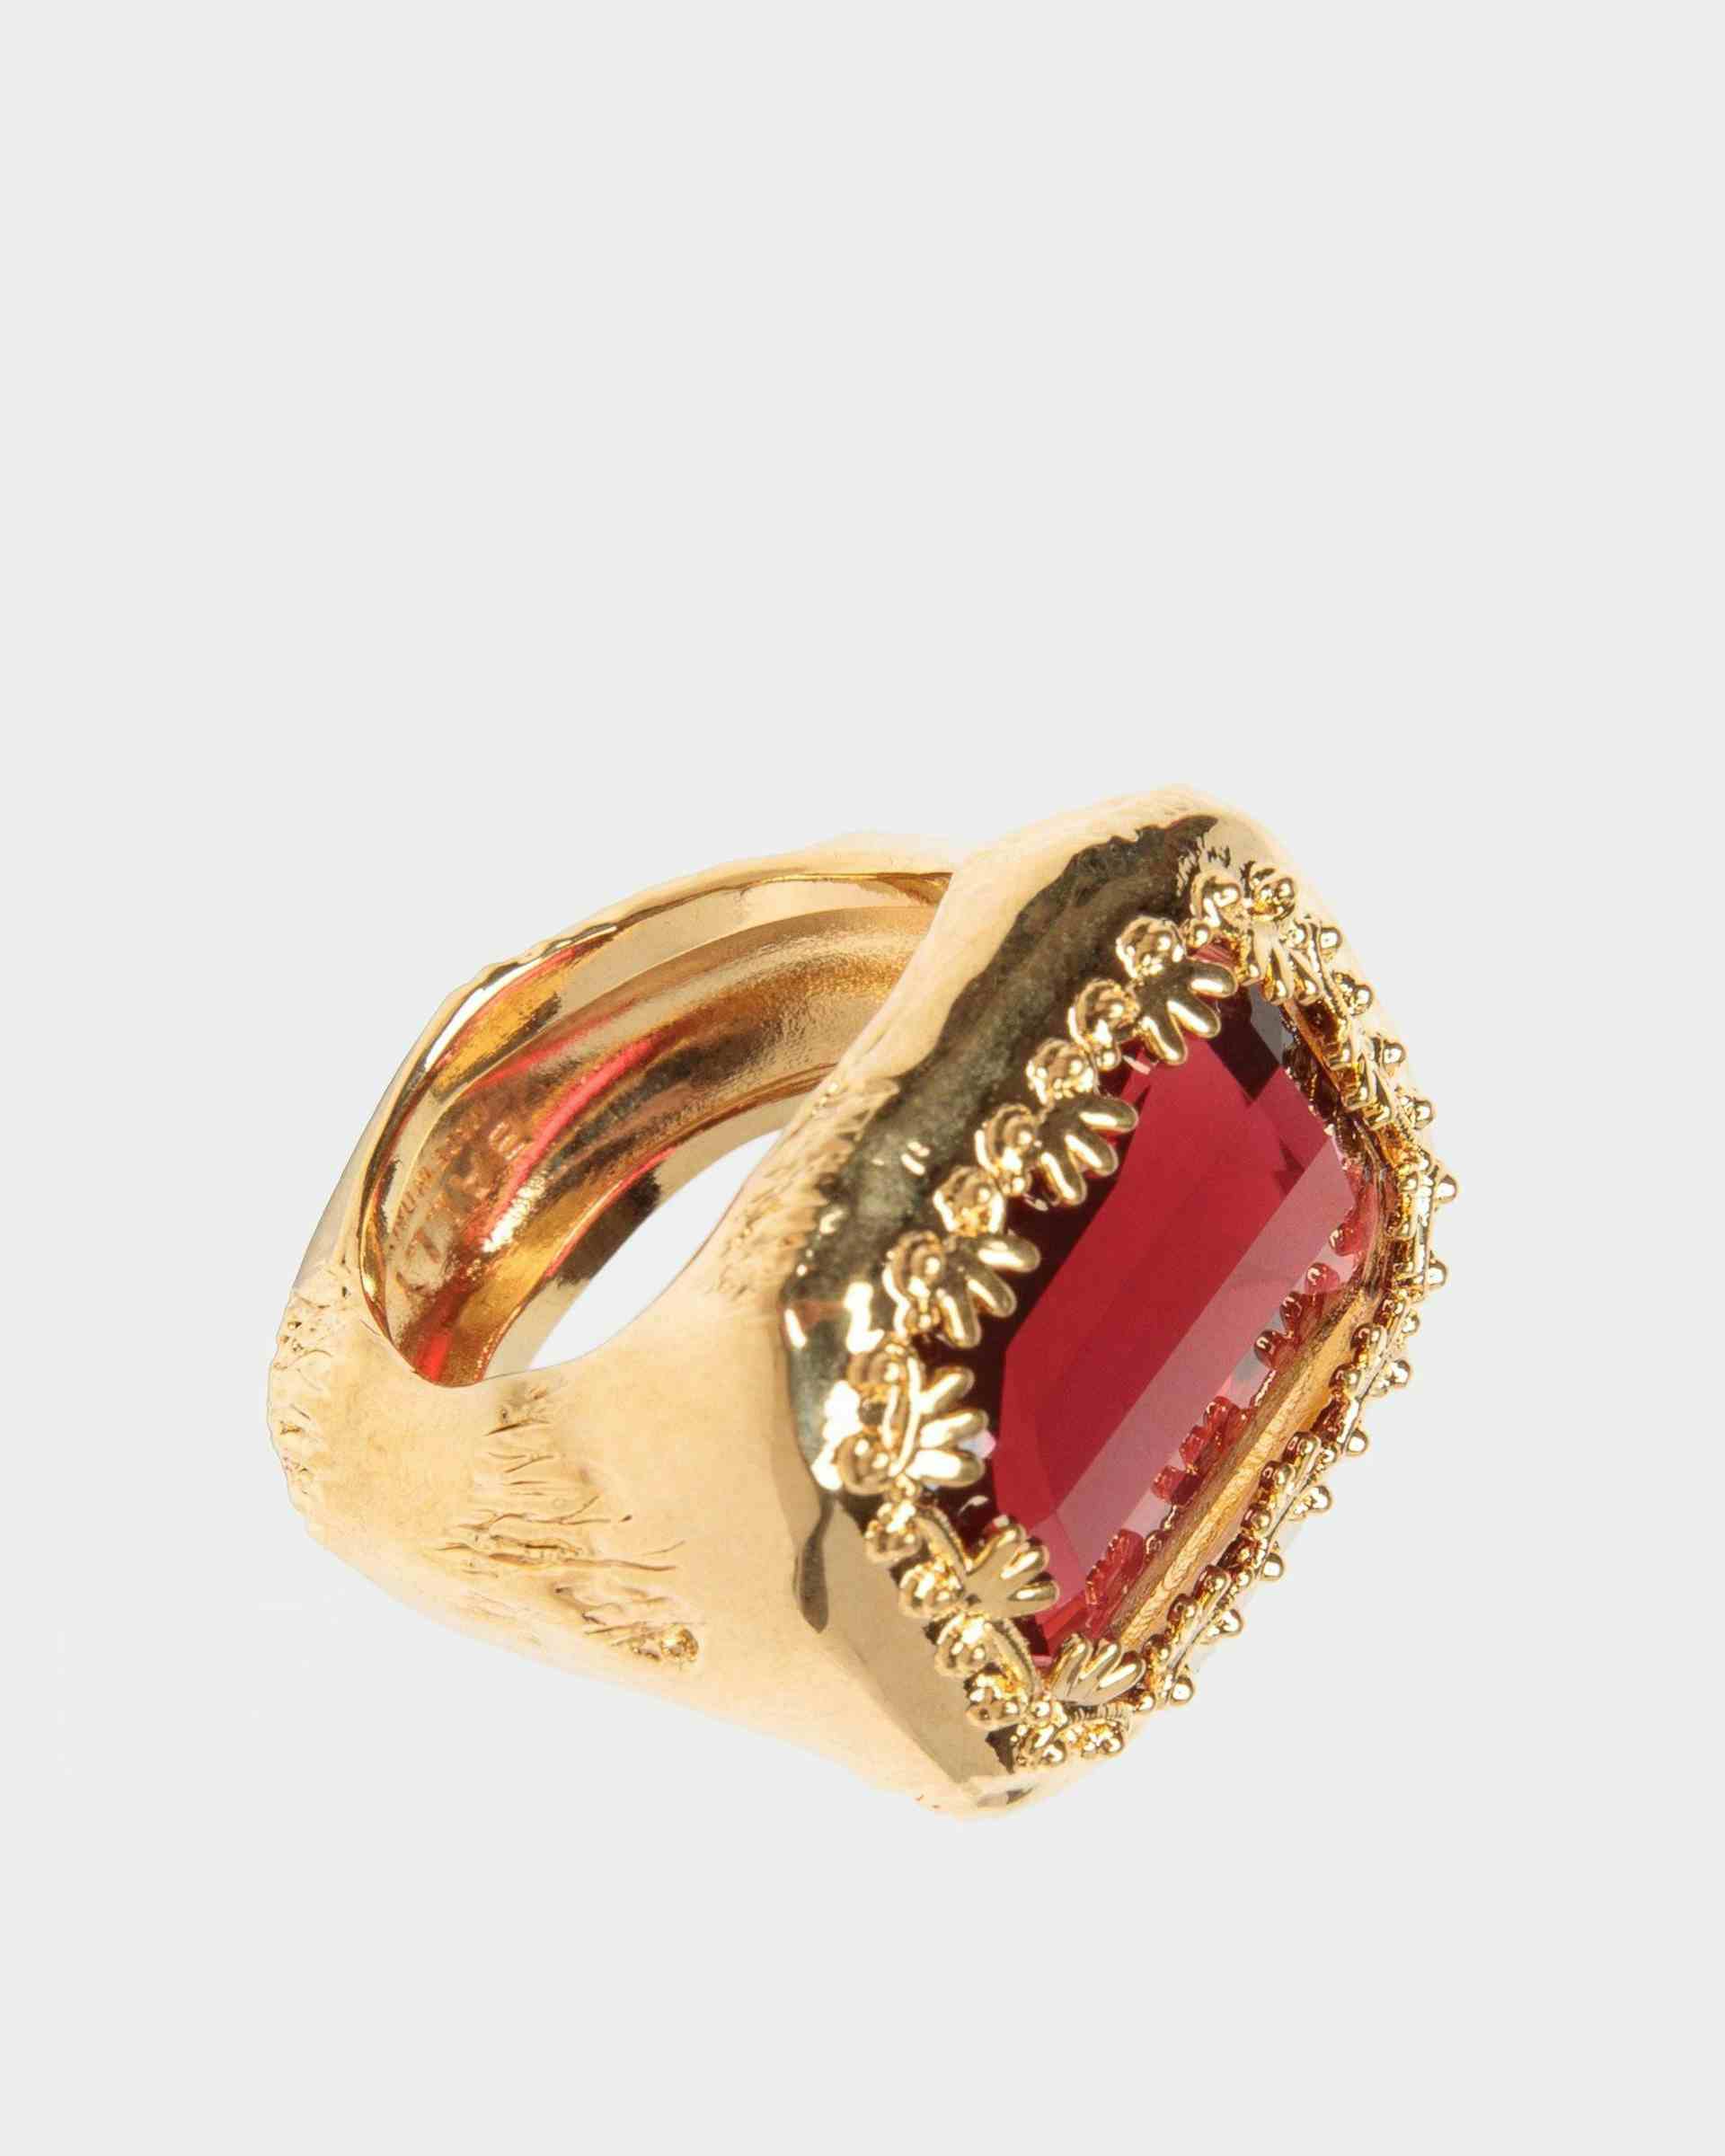 Baroque Ring In Hammered Gold - Women's - Bally